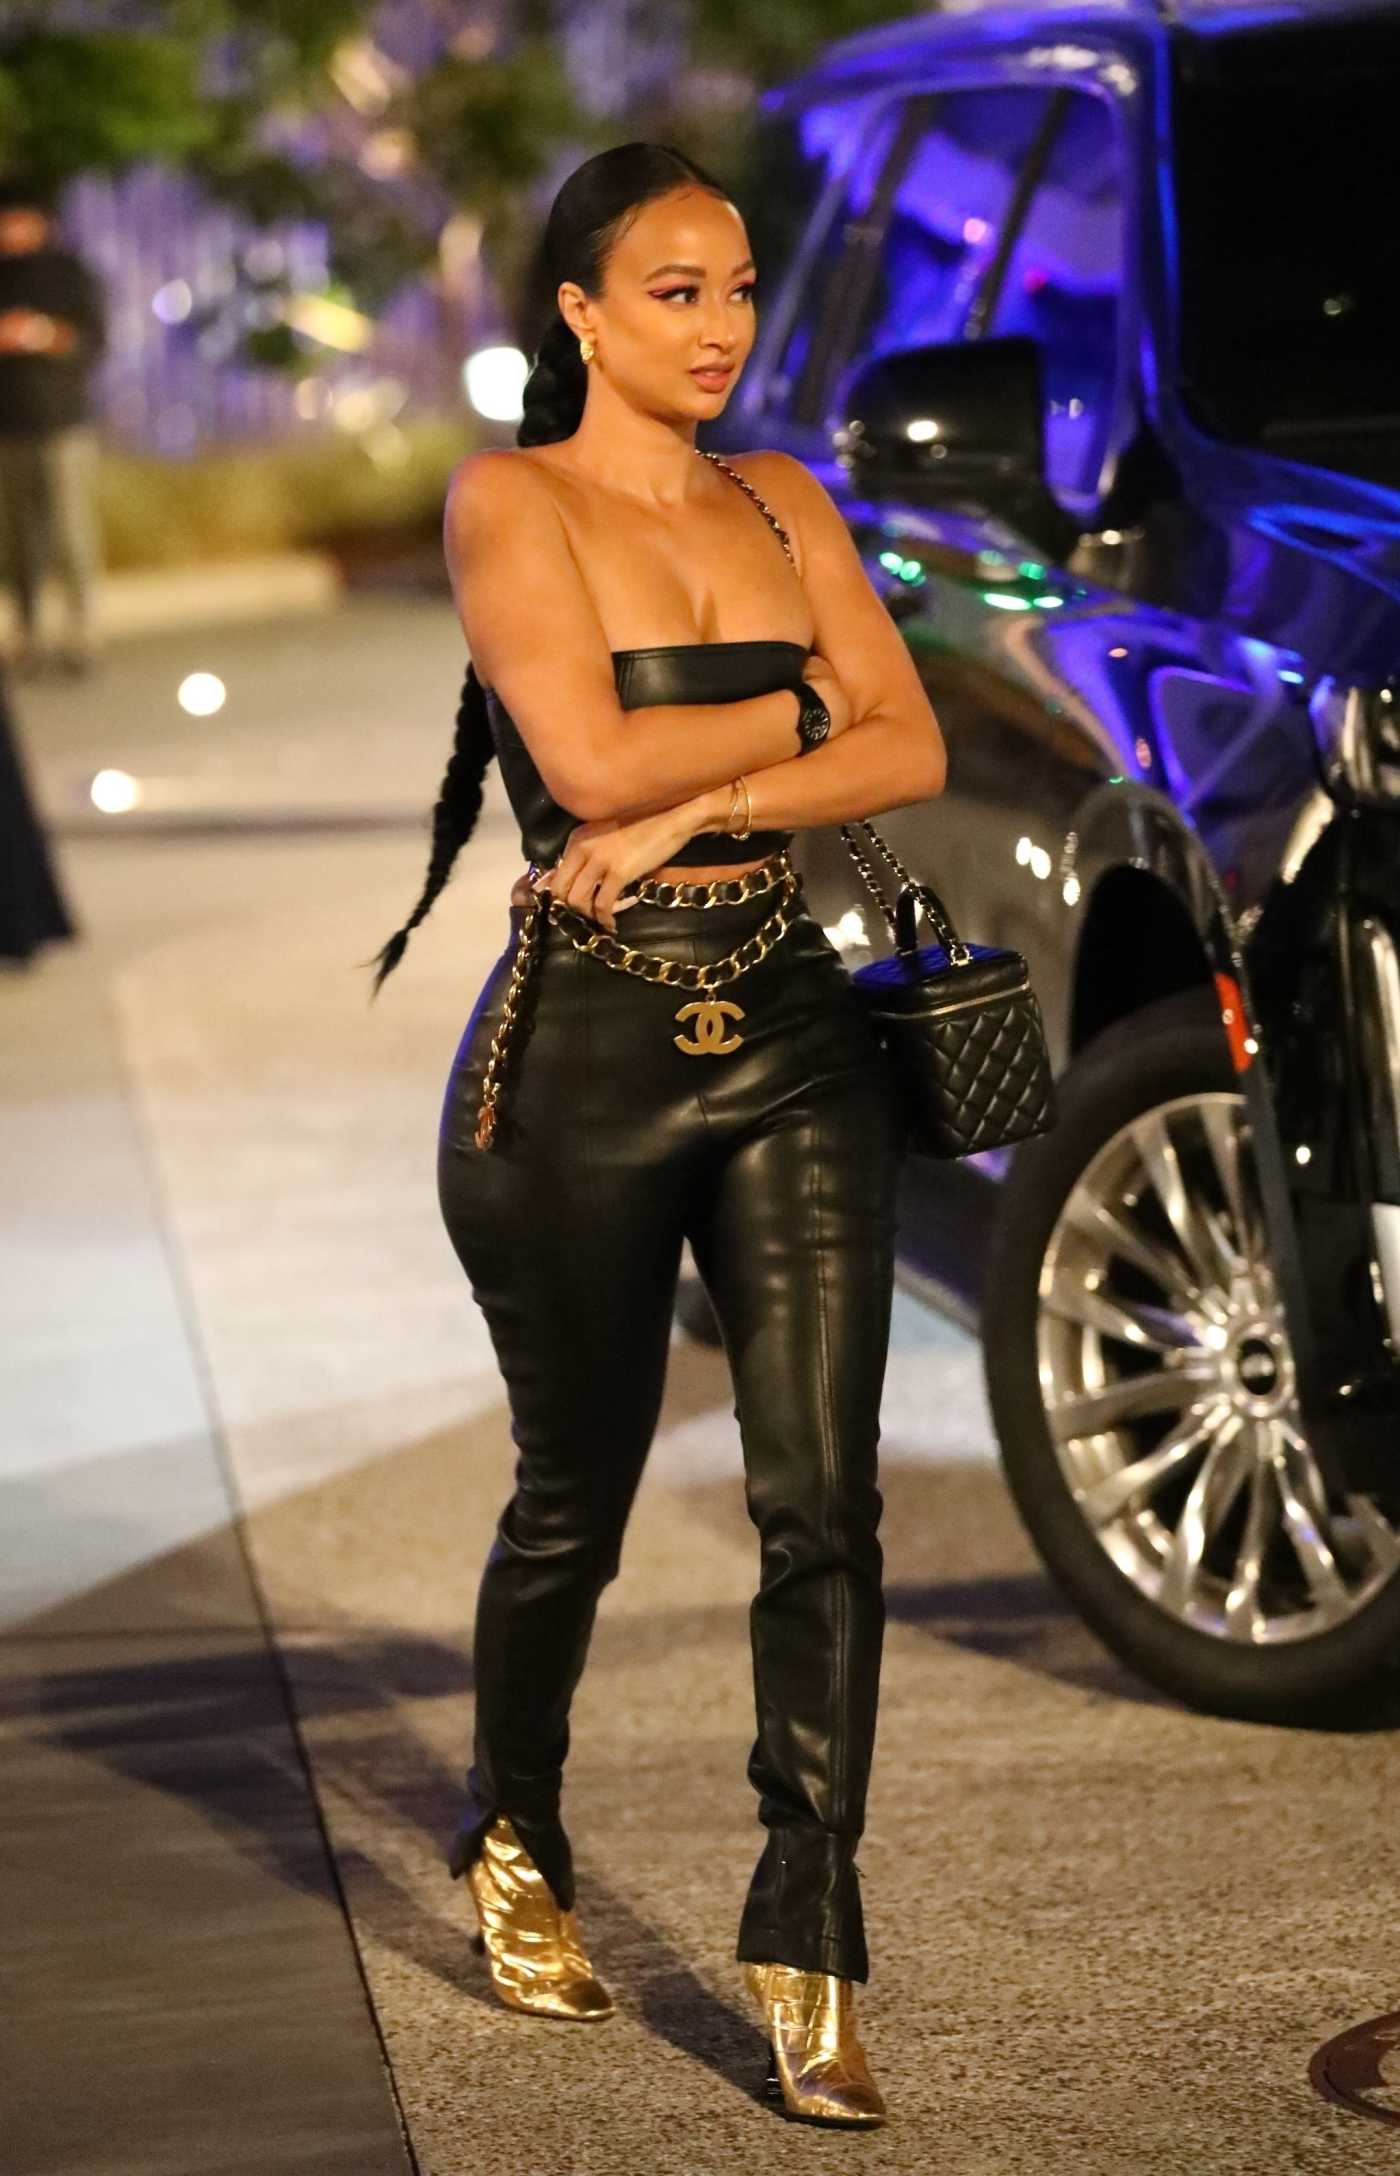 Draya Michele in a Black Leather Pants Leaves Drake's Billboard After-Party at the Sofi Stadium in Inglewood 05/24/2021